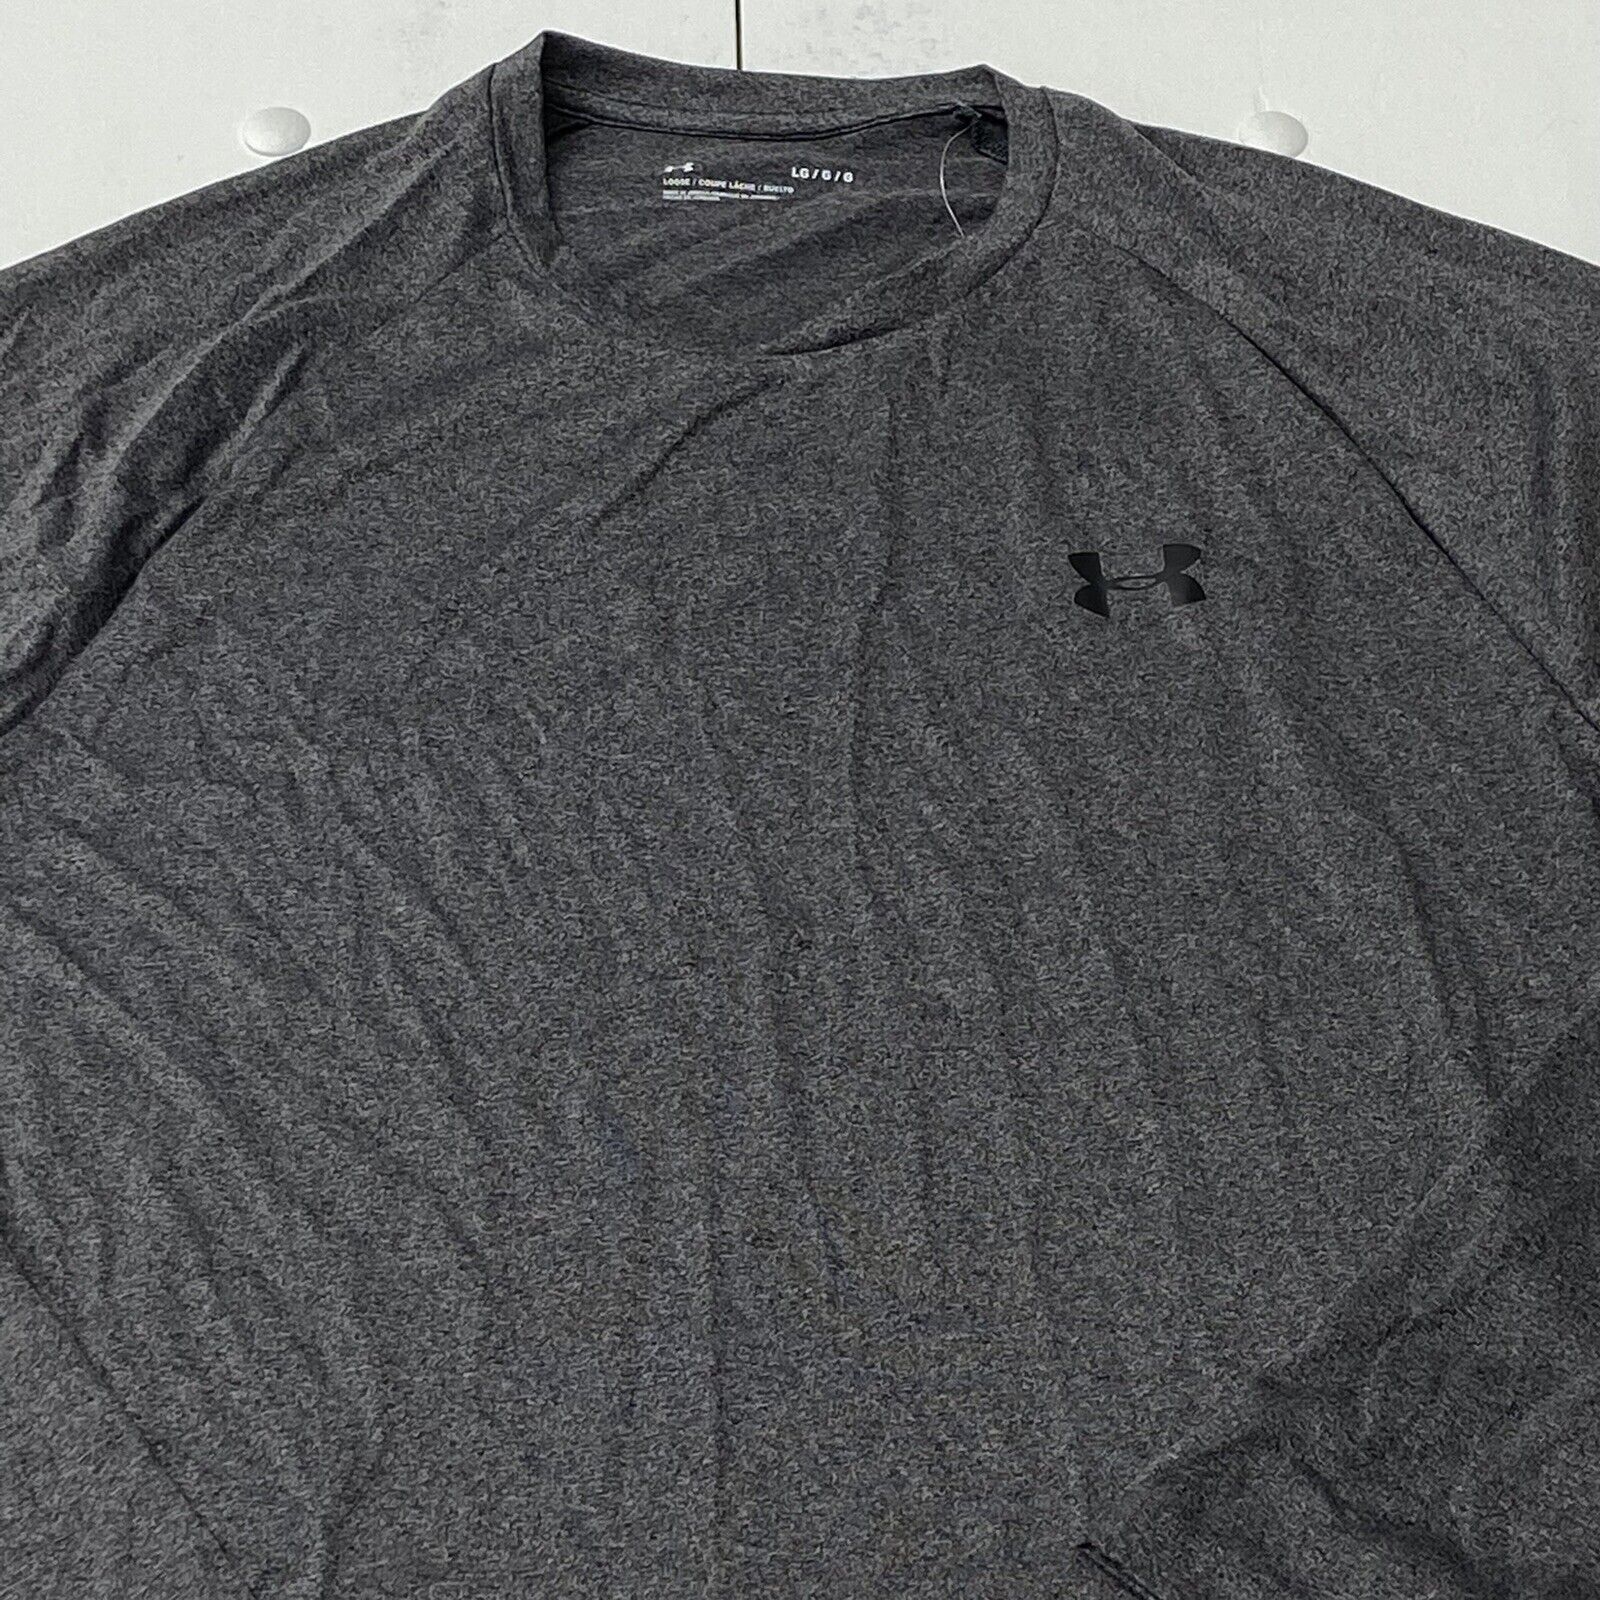 Under Armour Gray Dry Fit Long Sleeve Athletic Shirt Men Size L Loose -  beyond exchange